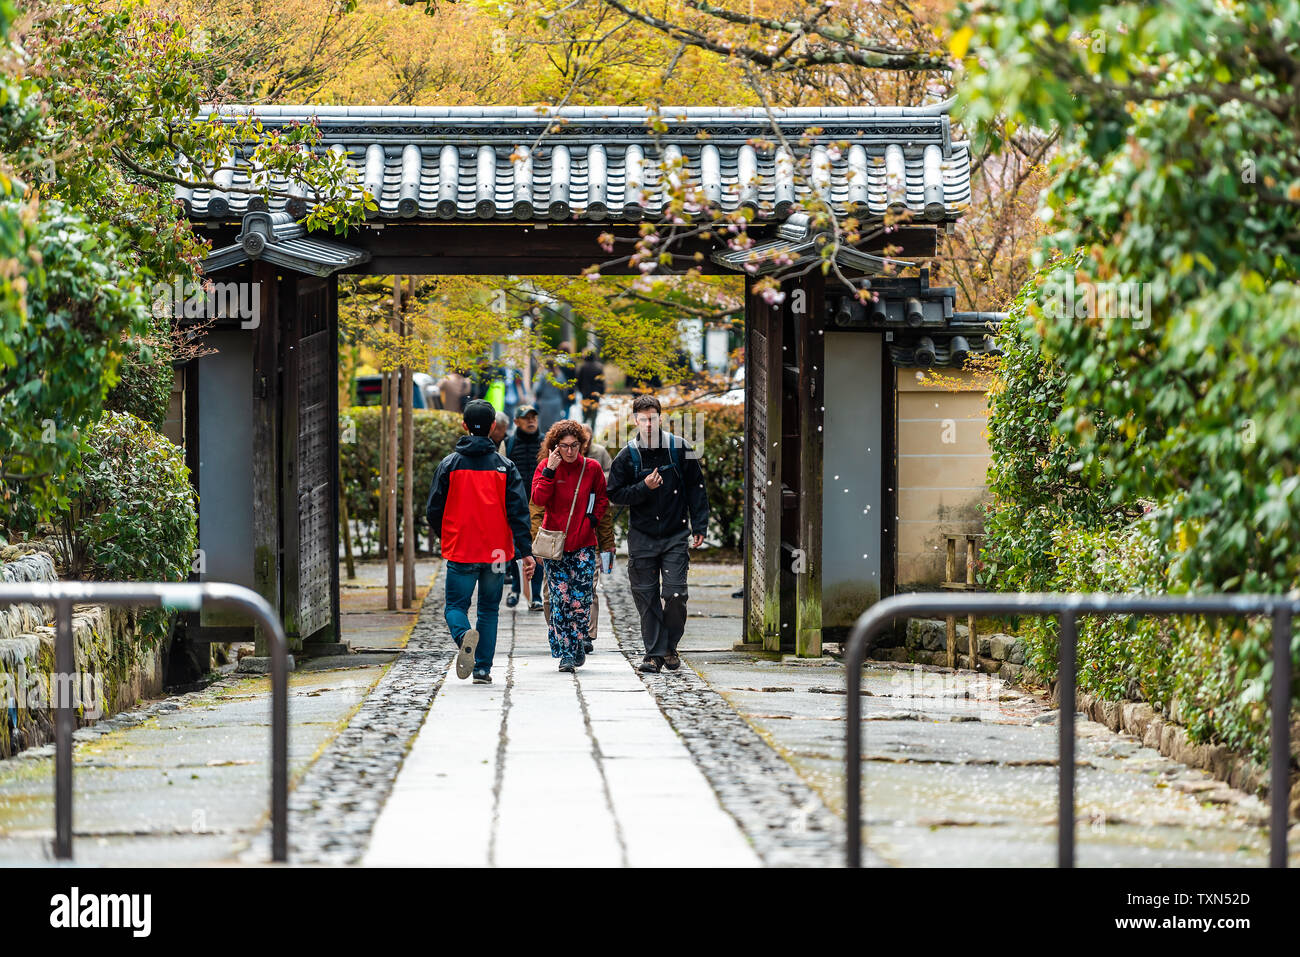 Kyoto, Japan - April 10, 2019: Ryoanji temple entrance or exit with people walking in spring Stock Photo